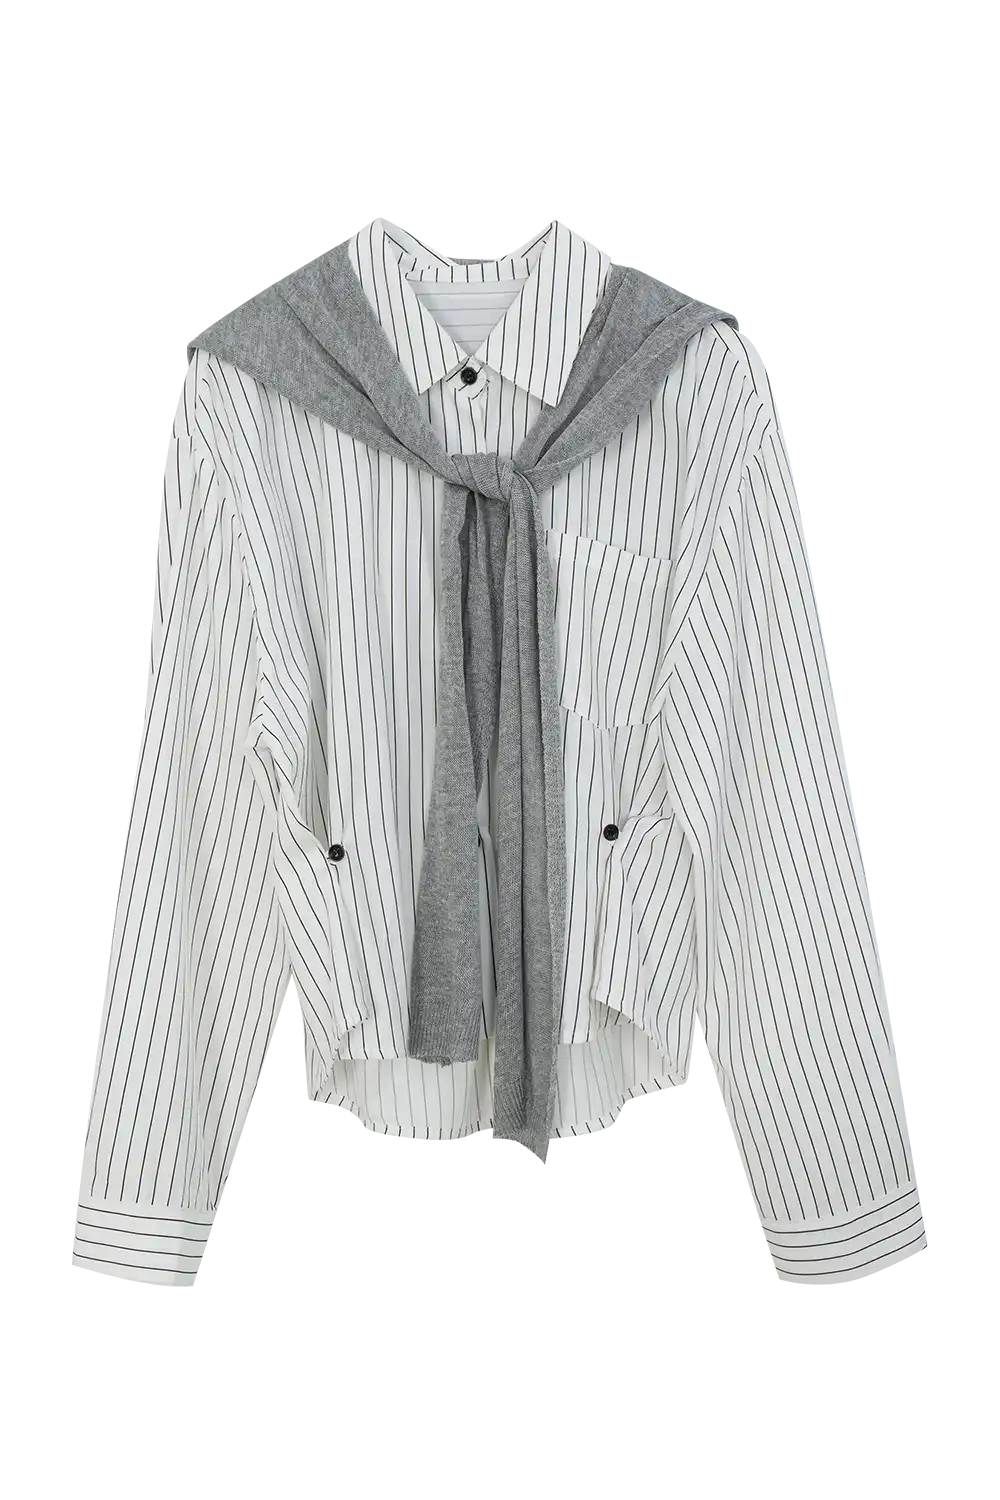 Chic Striped Tie-Front Blouse with Elegant Shawl